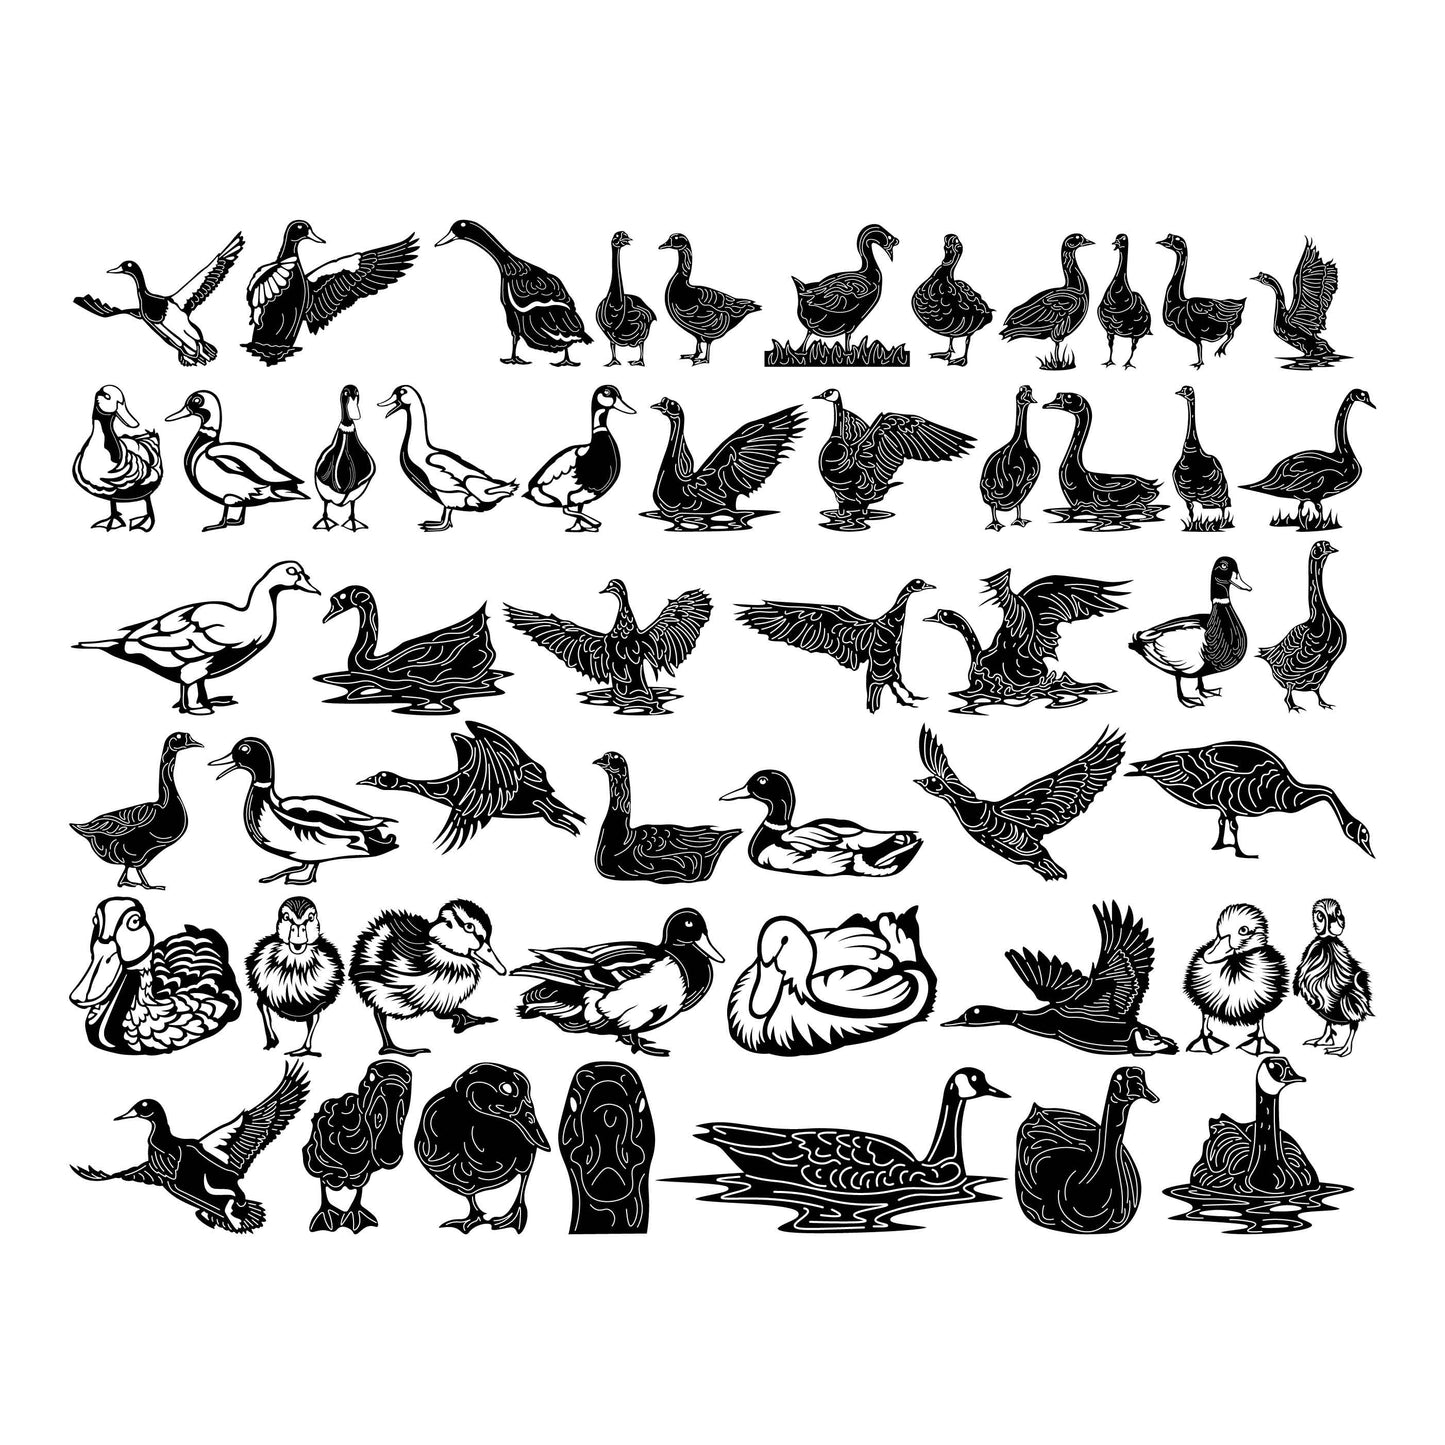 Ducks and Goose Birds-DXF files Cut Ready for CNC-DXFforCNC.com